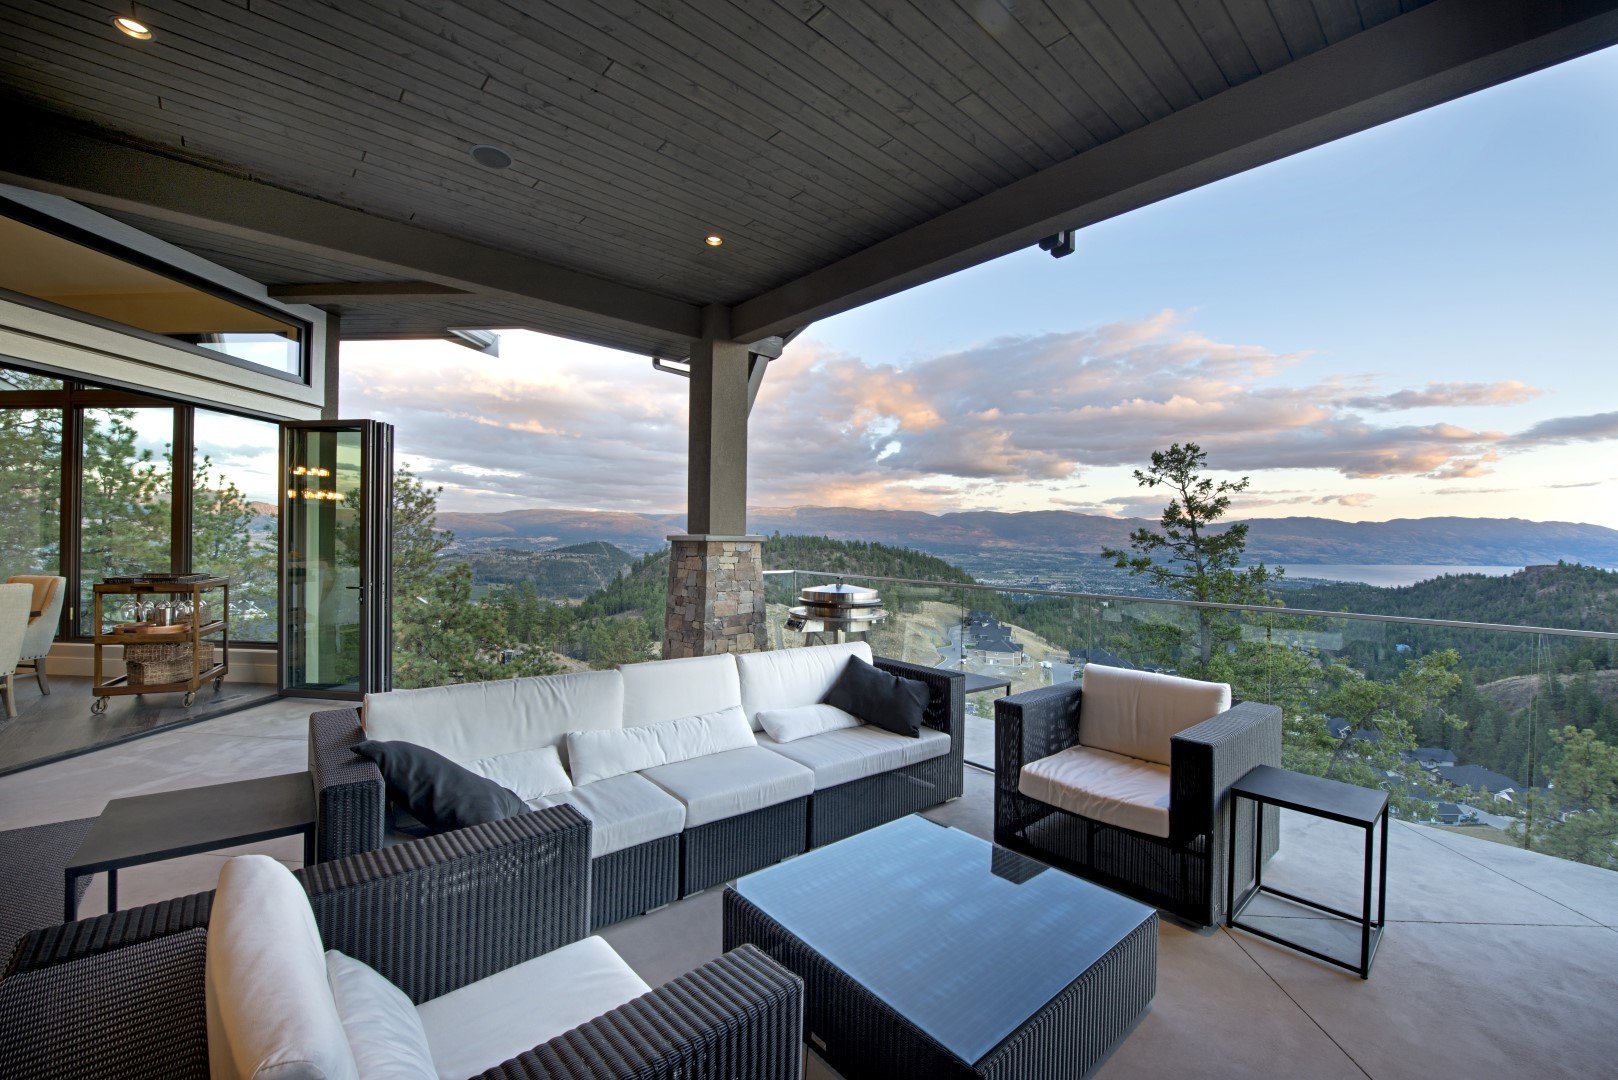 Outdoor living on the deck